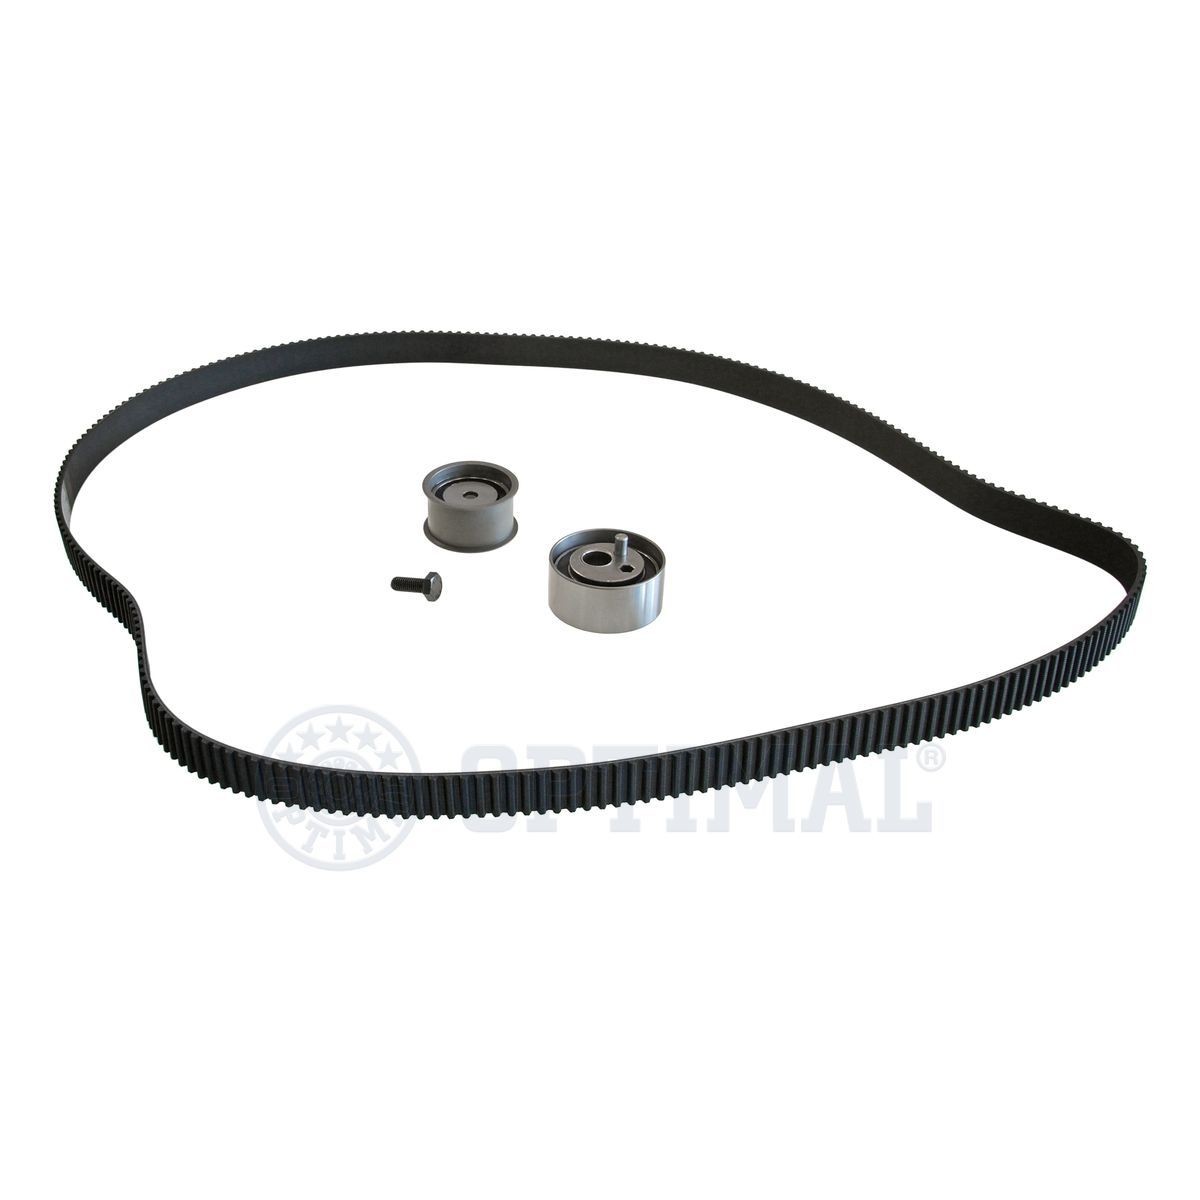 OPTIMAL SK-1383 Timing belt kit Number of Teeth: 253, with accessories, without tensioner pulley damper